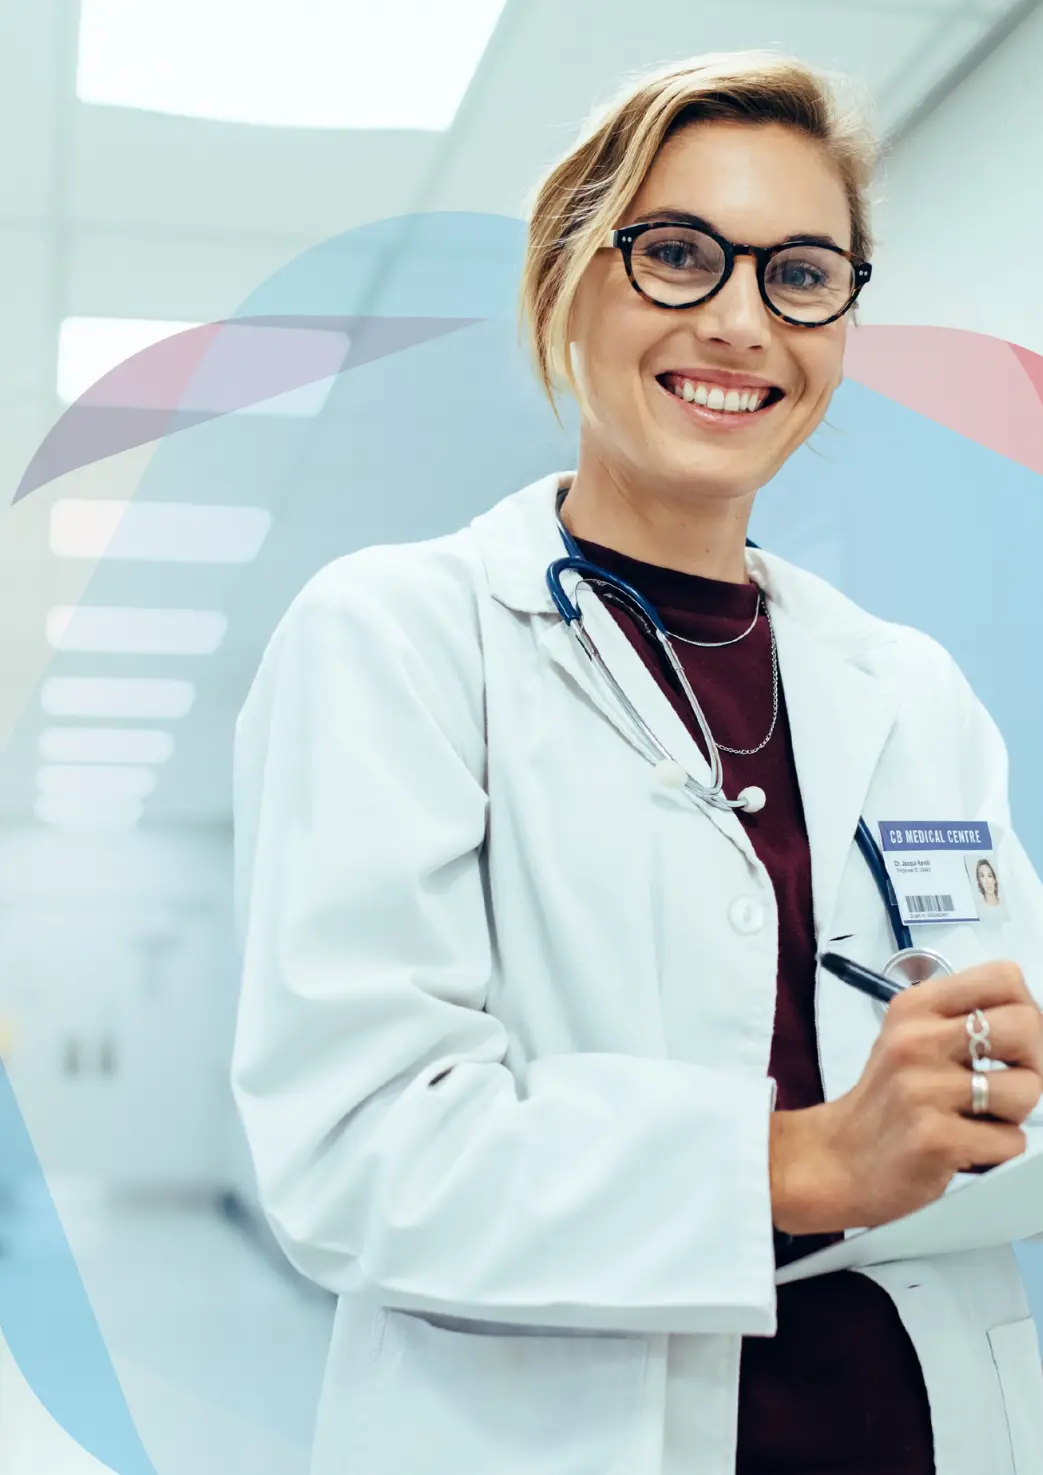 Confident healthcare professional with a warm smile, representing Zamann Pharma's collaboration with BioRN for advancing life science research and digital pharmaceutical solutions in Germany's dynamic biotech hub.